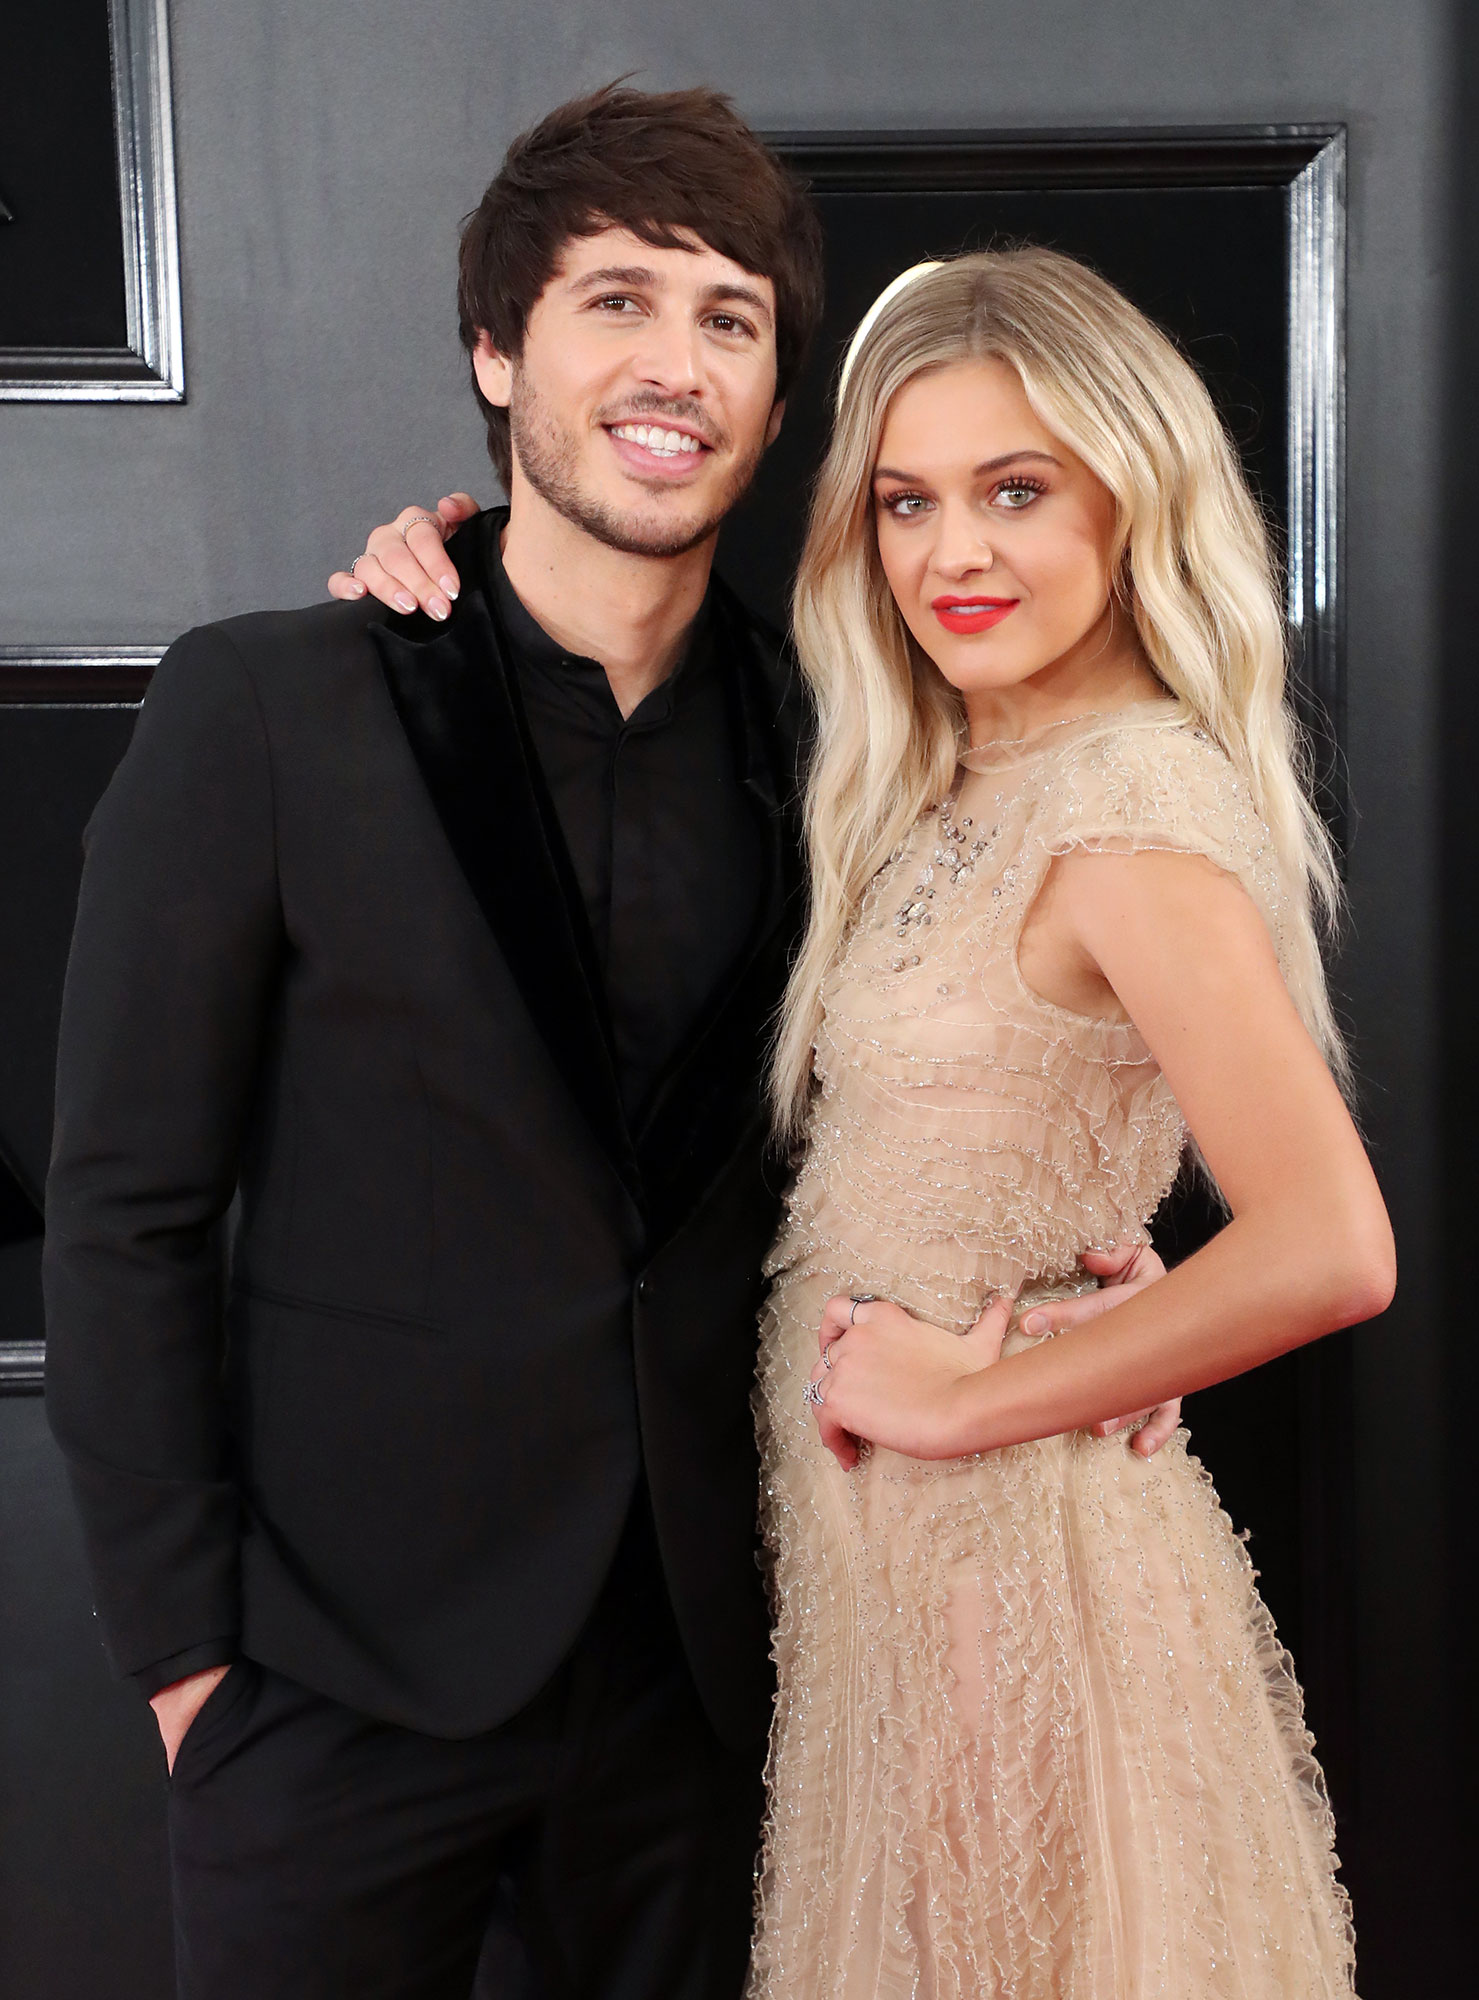 Kelsea Ballerini filed for divorce from Morgan Evans in August after nearly five years of marriage